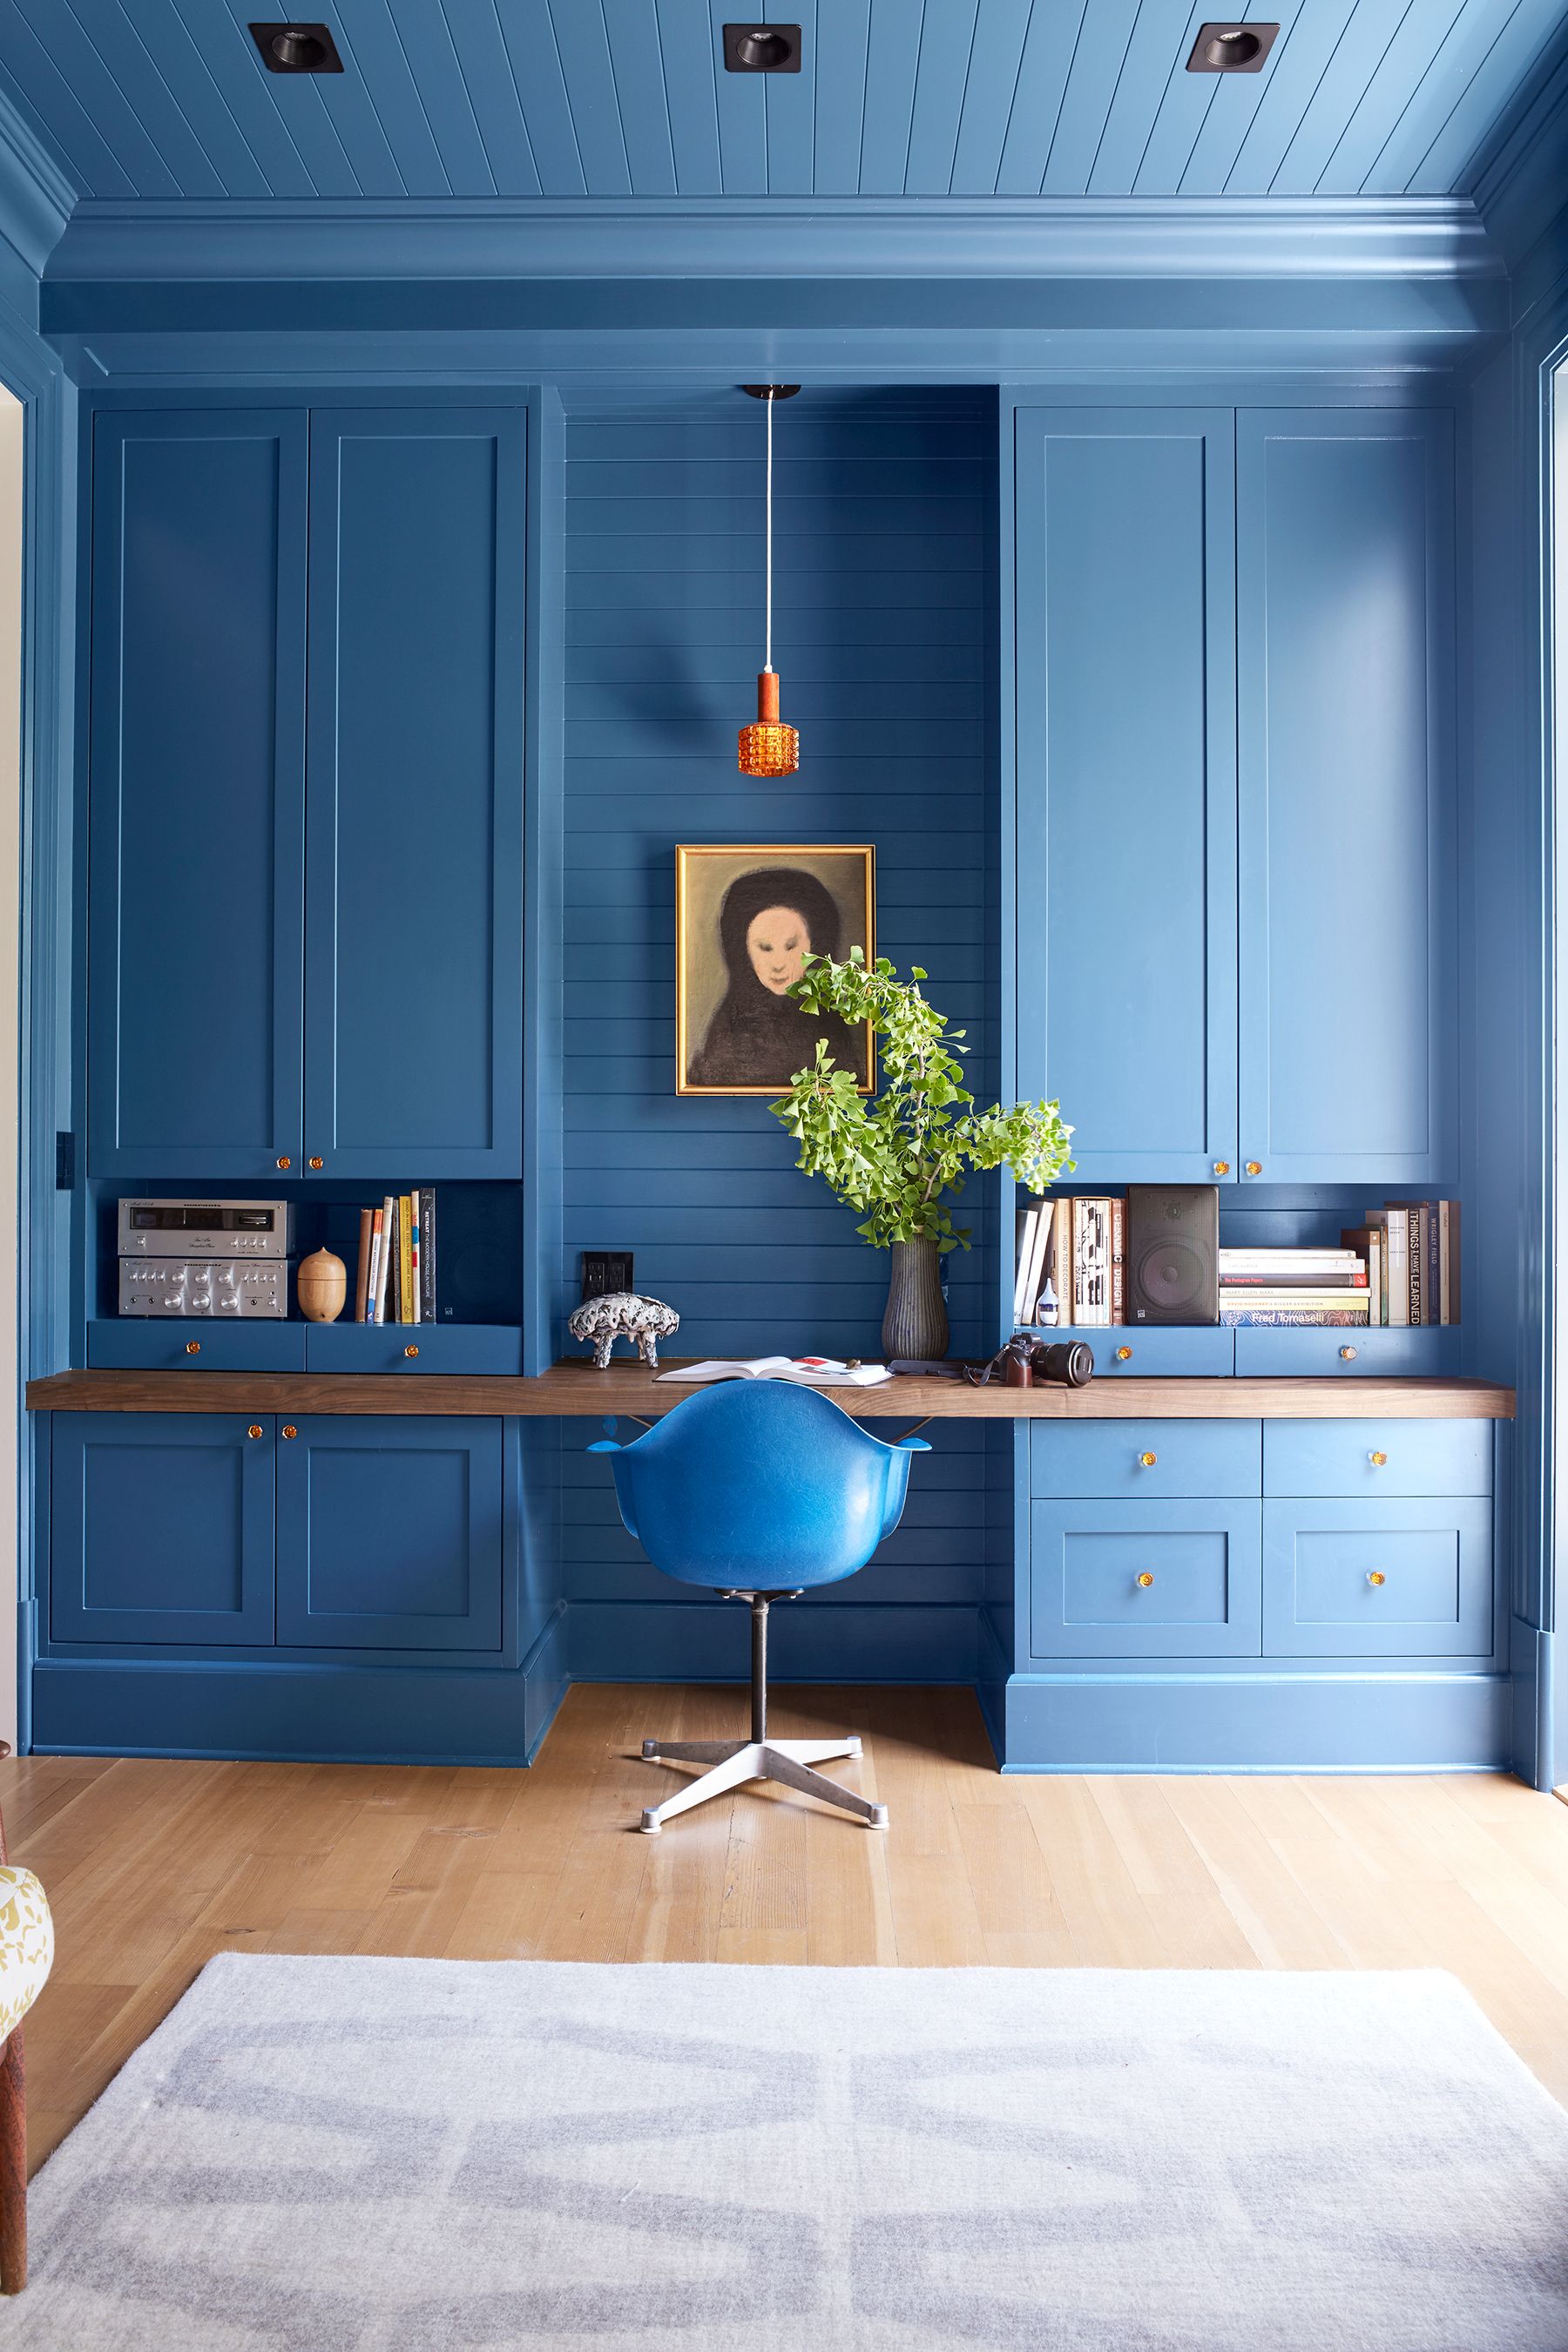 11 Beautiful Home Offices That Are Neat and Organized